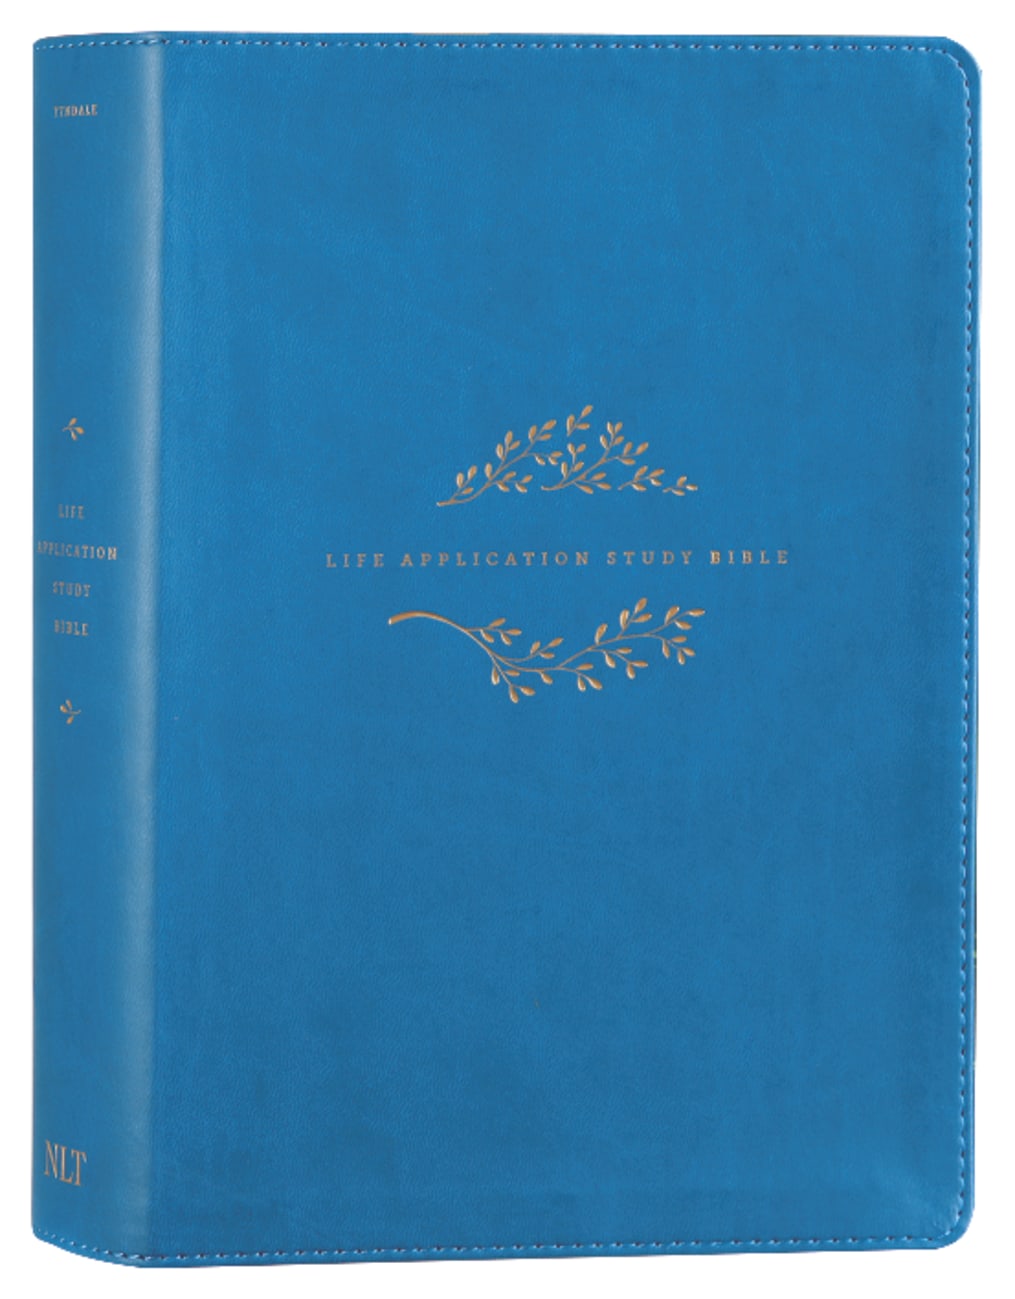 NLT Life Application Study Bible 3rd Edition Teal Blue (Black Letter Edition) Imitation Leather